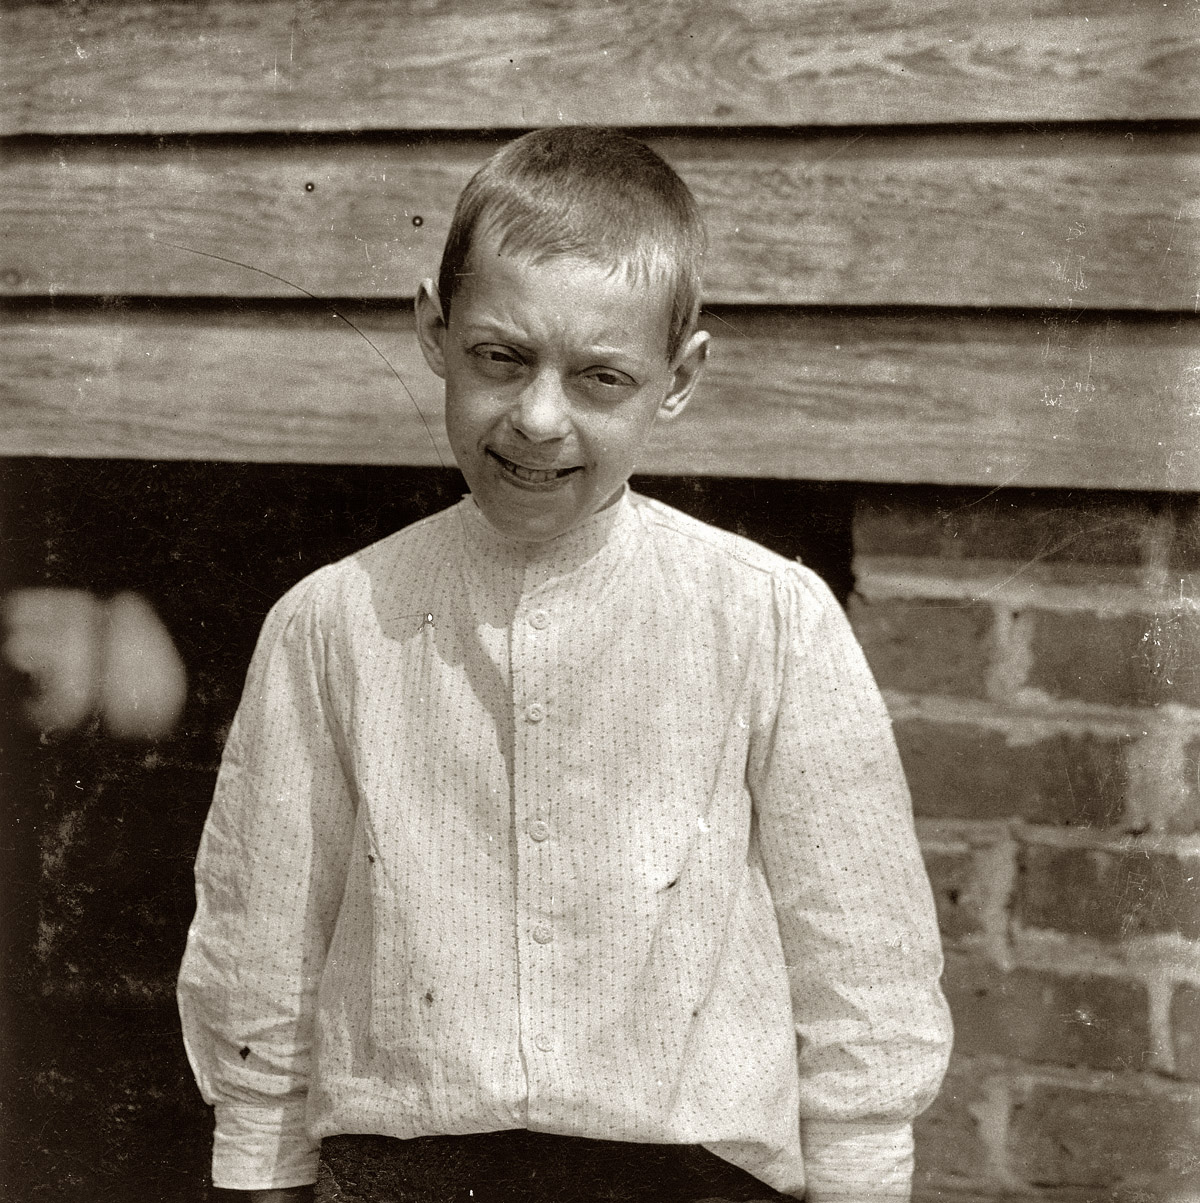 May 1912. Spartanburg, South Carolina. Tom Polk, "goin' on 13." Prematurely old, works in Beaumont Mill. View full size. Photograph by Lewis Wickes Hine.